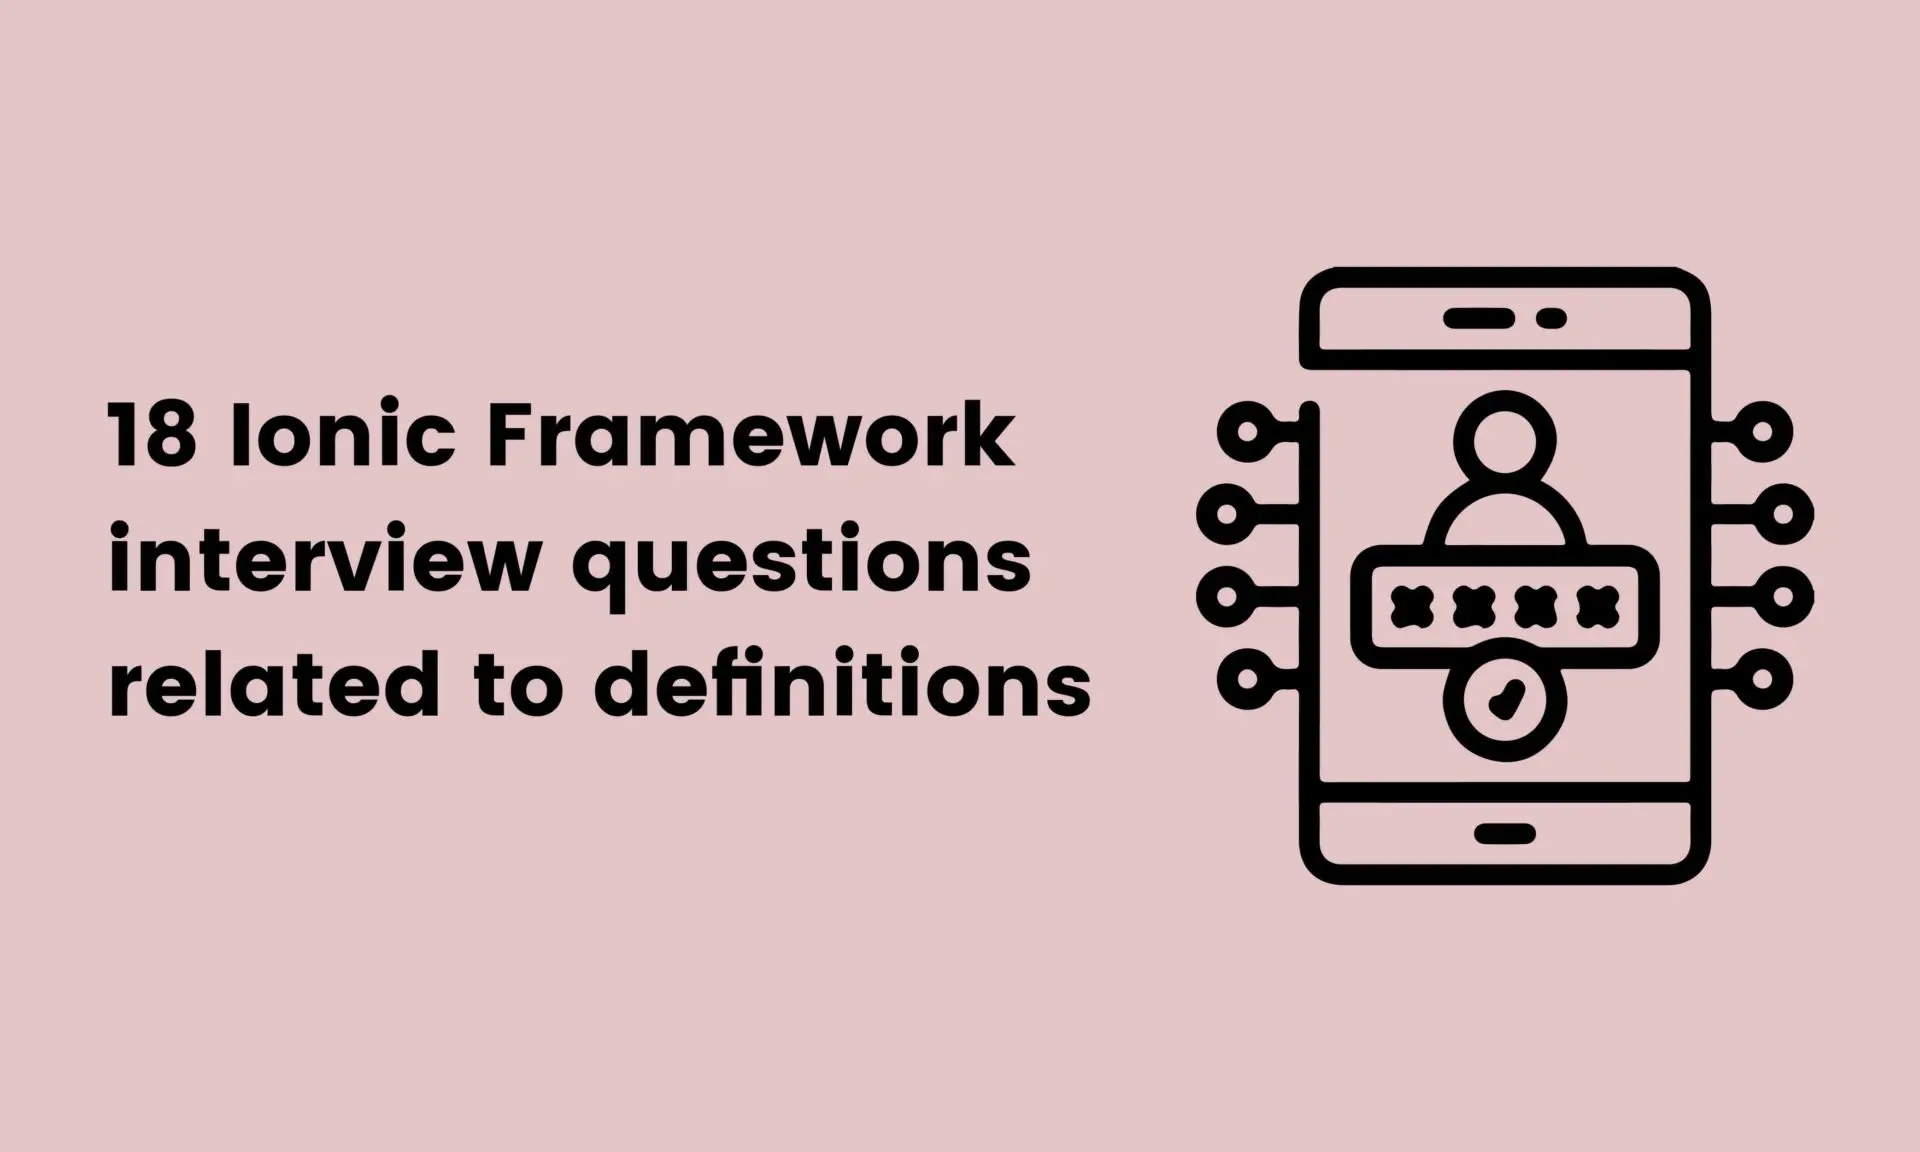 18 Ionic Framework interview questions related to definitions